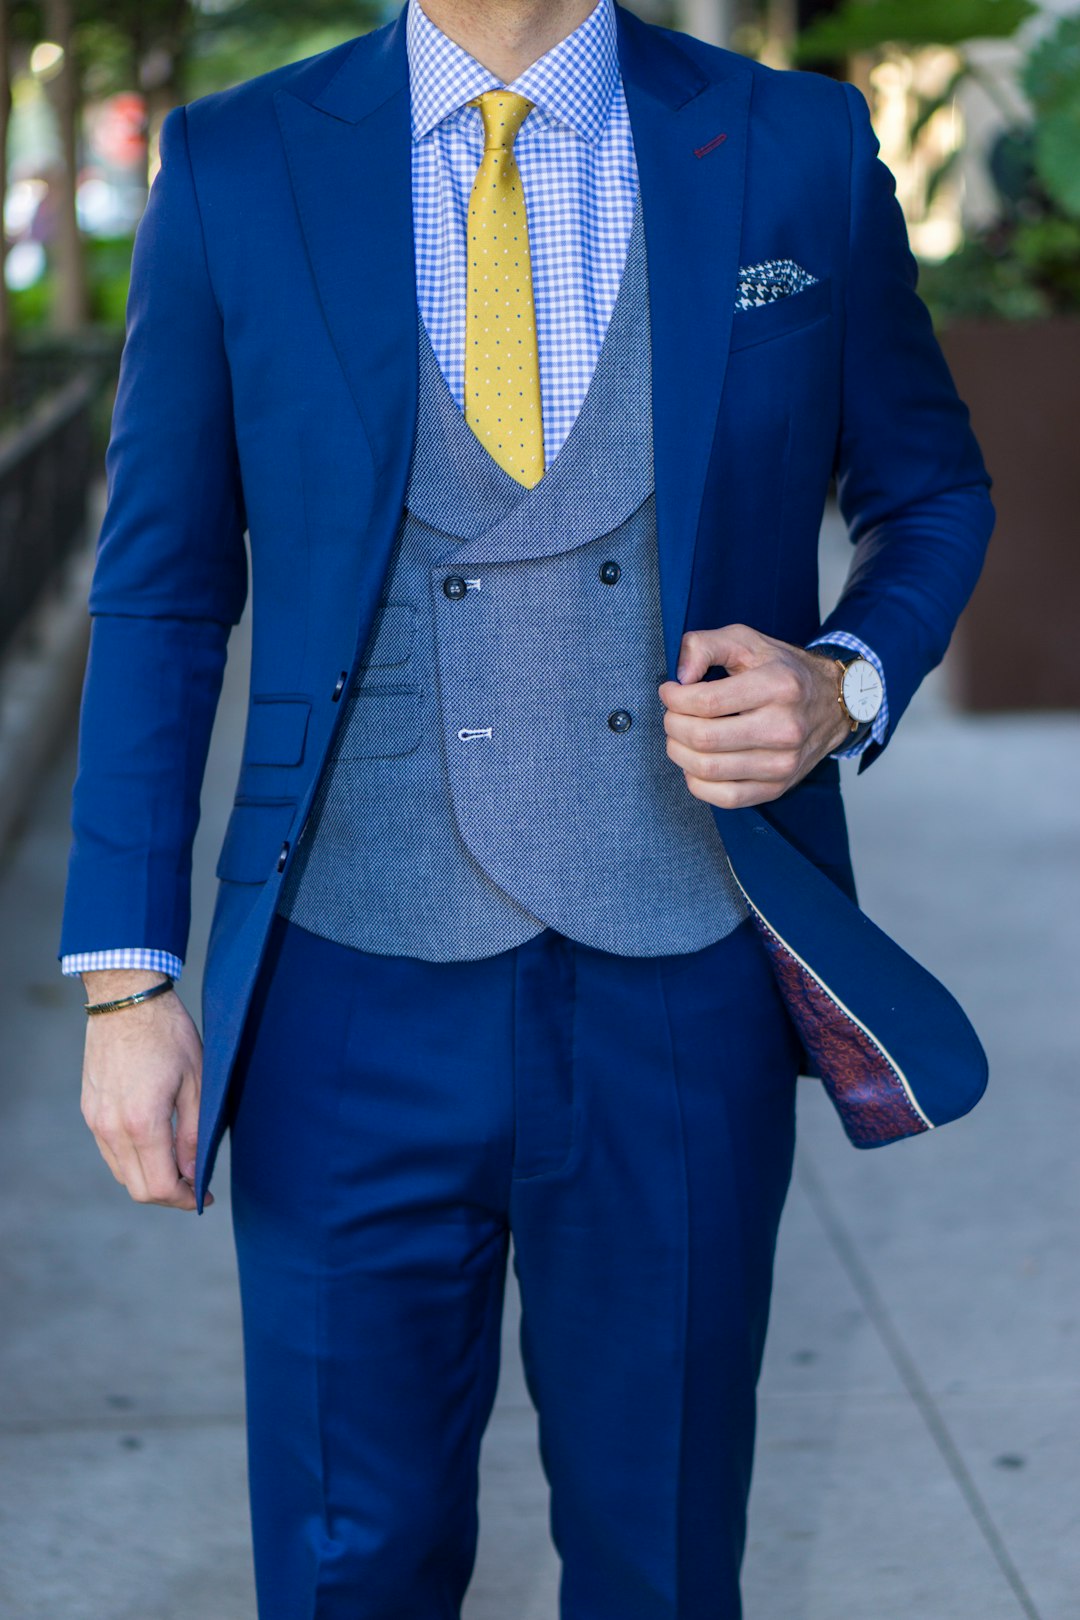 man in blue suit standing on road during daytime